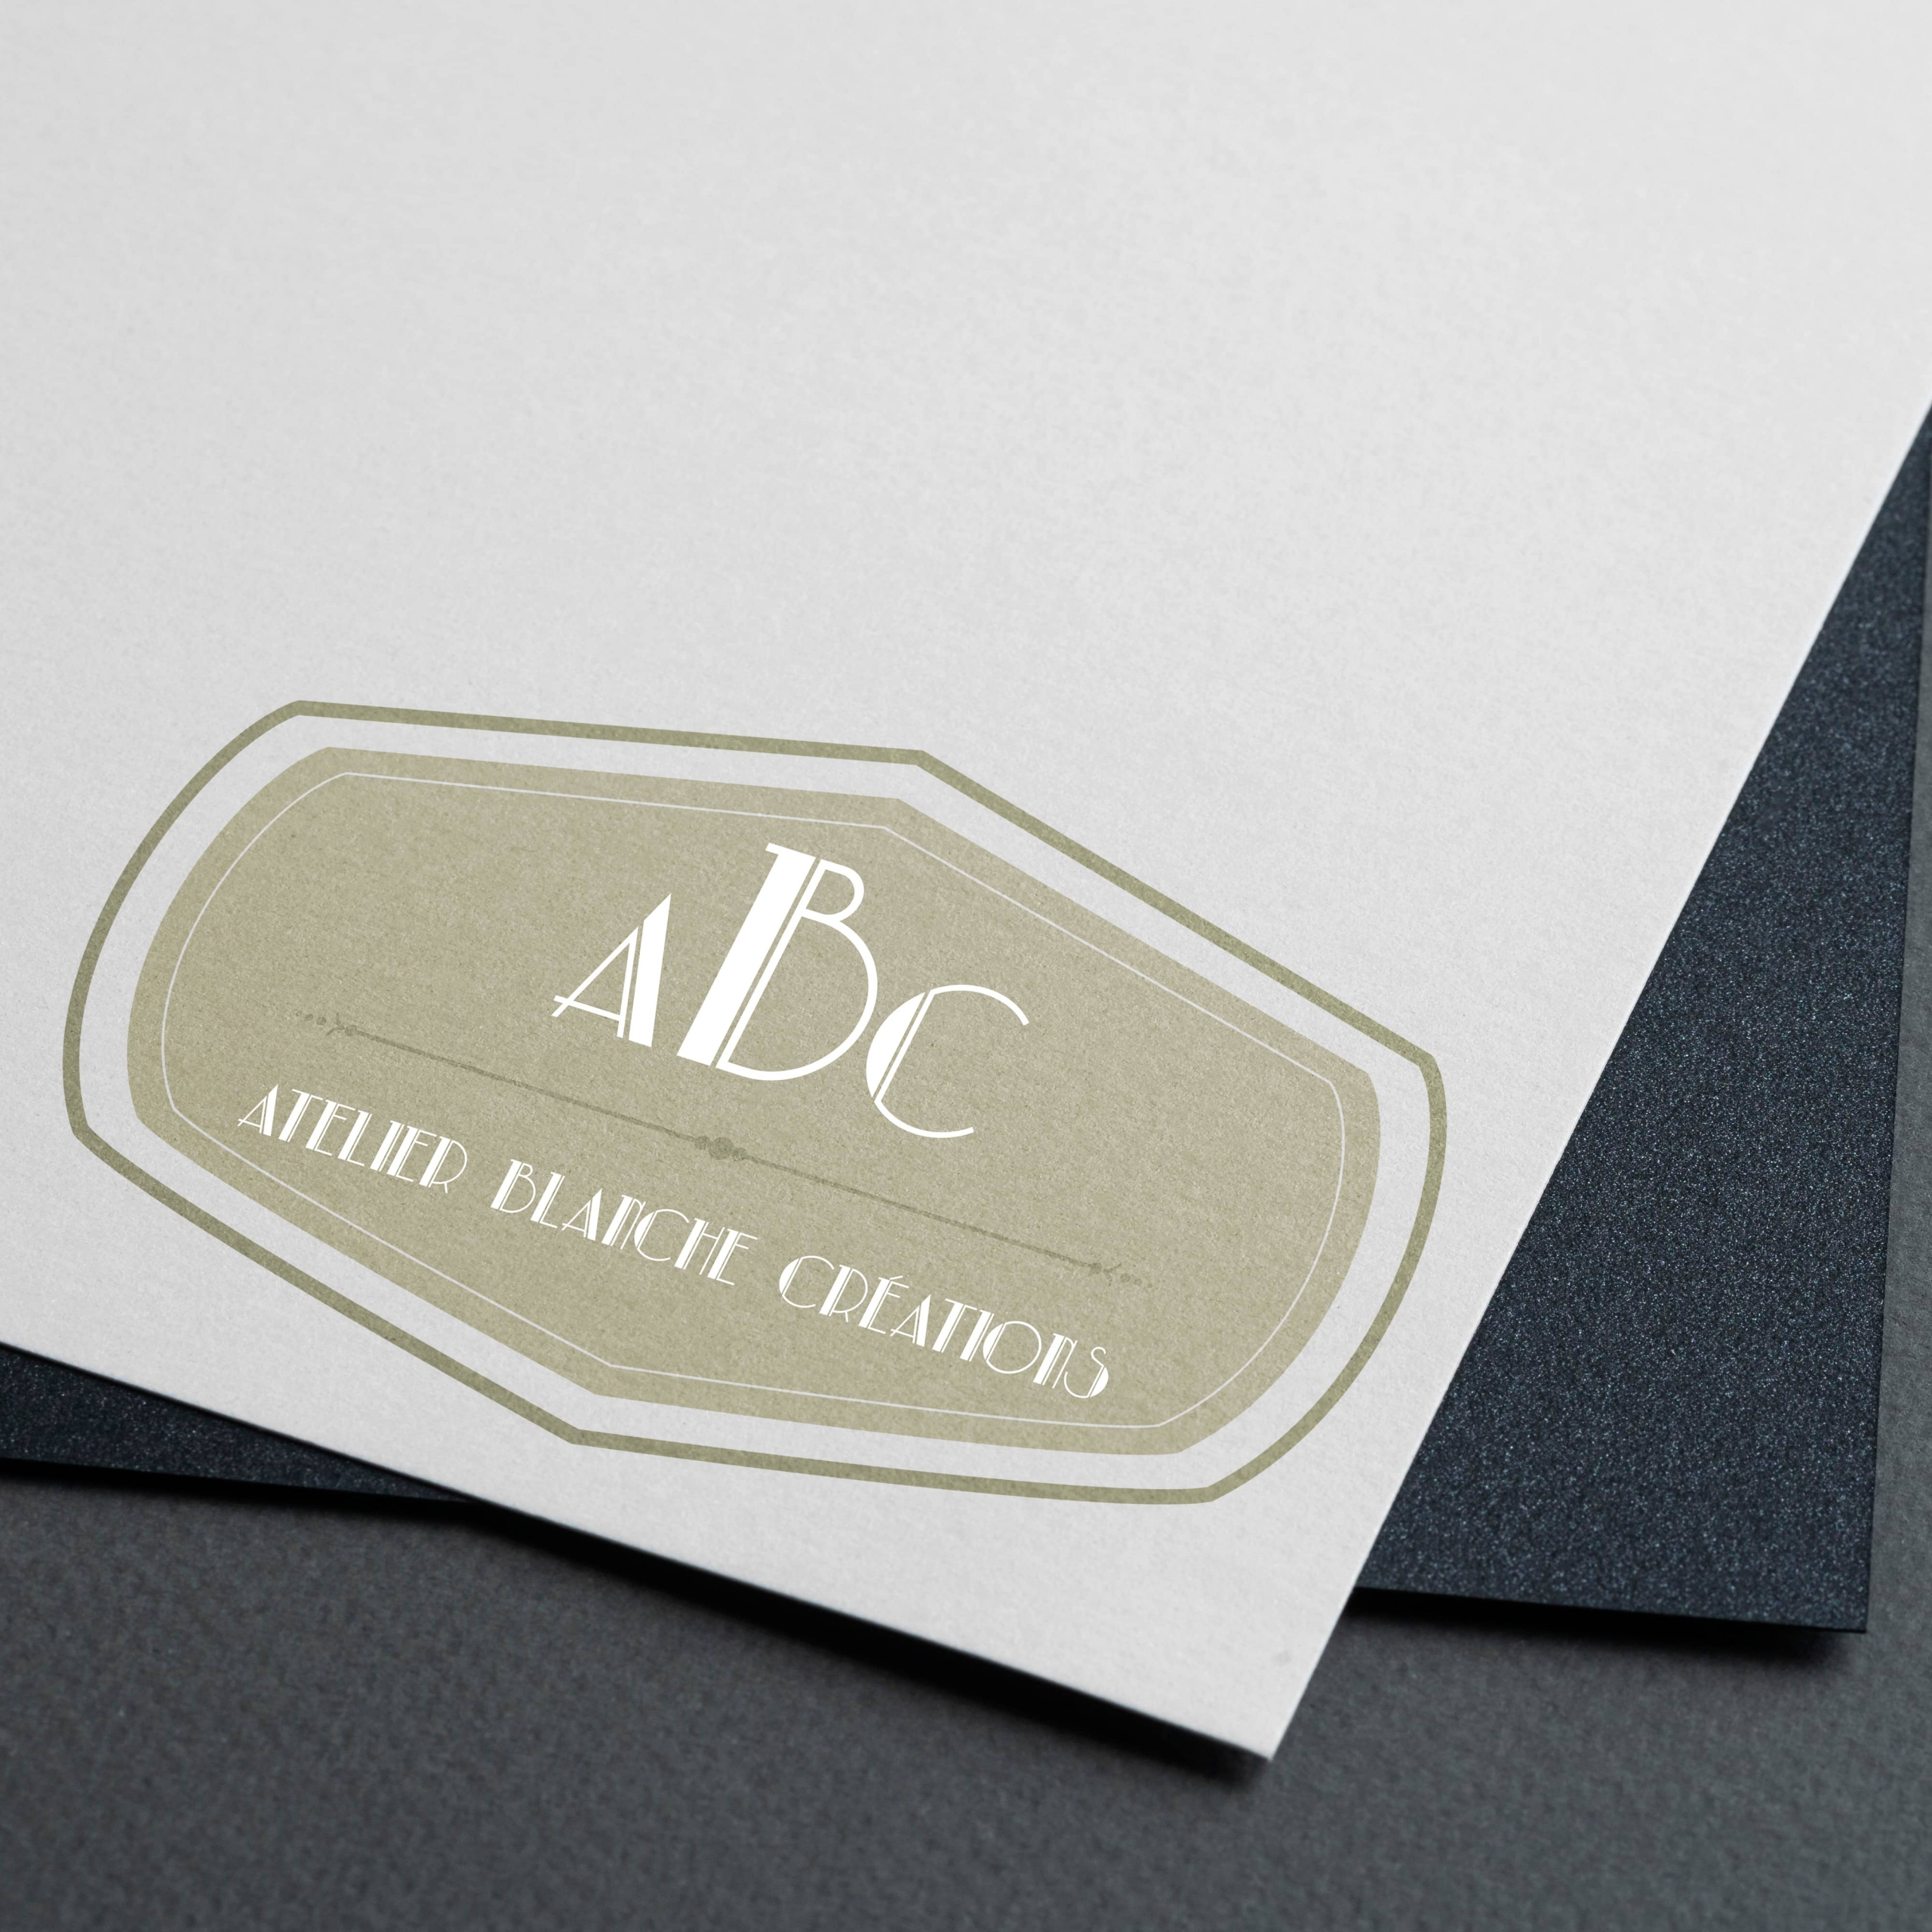 Logo Atelier Blanche Créations